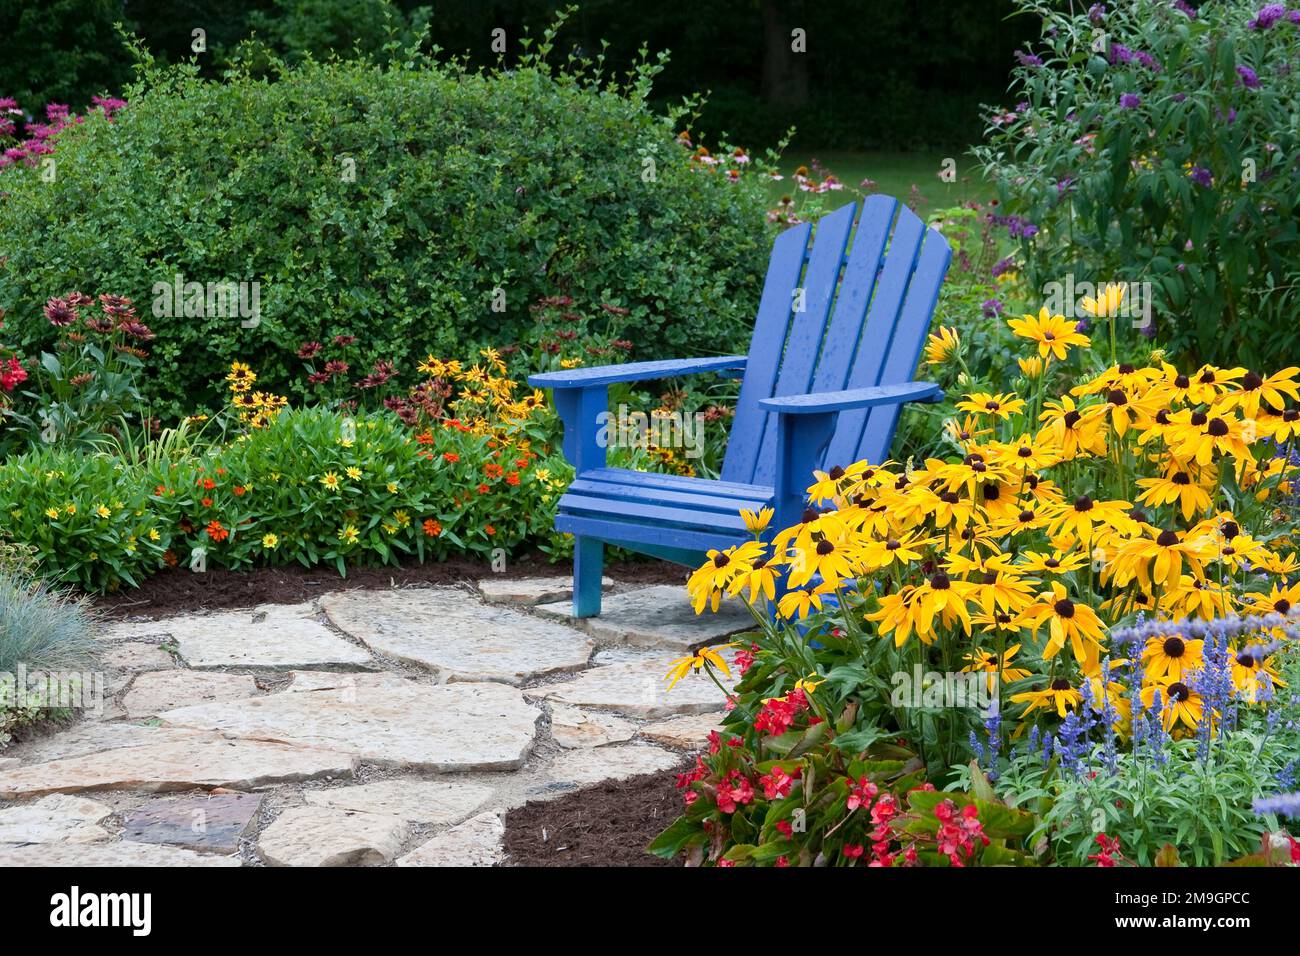 63821-21909 Flower garden with blue Adirondack chair and stone path.  Black-eyed Susans (Rudbeckia hirta)  Red Dragon Wing Begonias, zinnias, Blue Vic Stock Photo